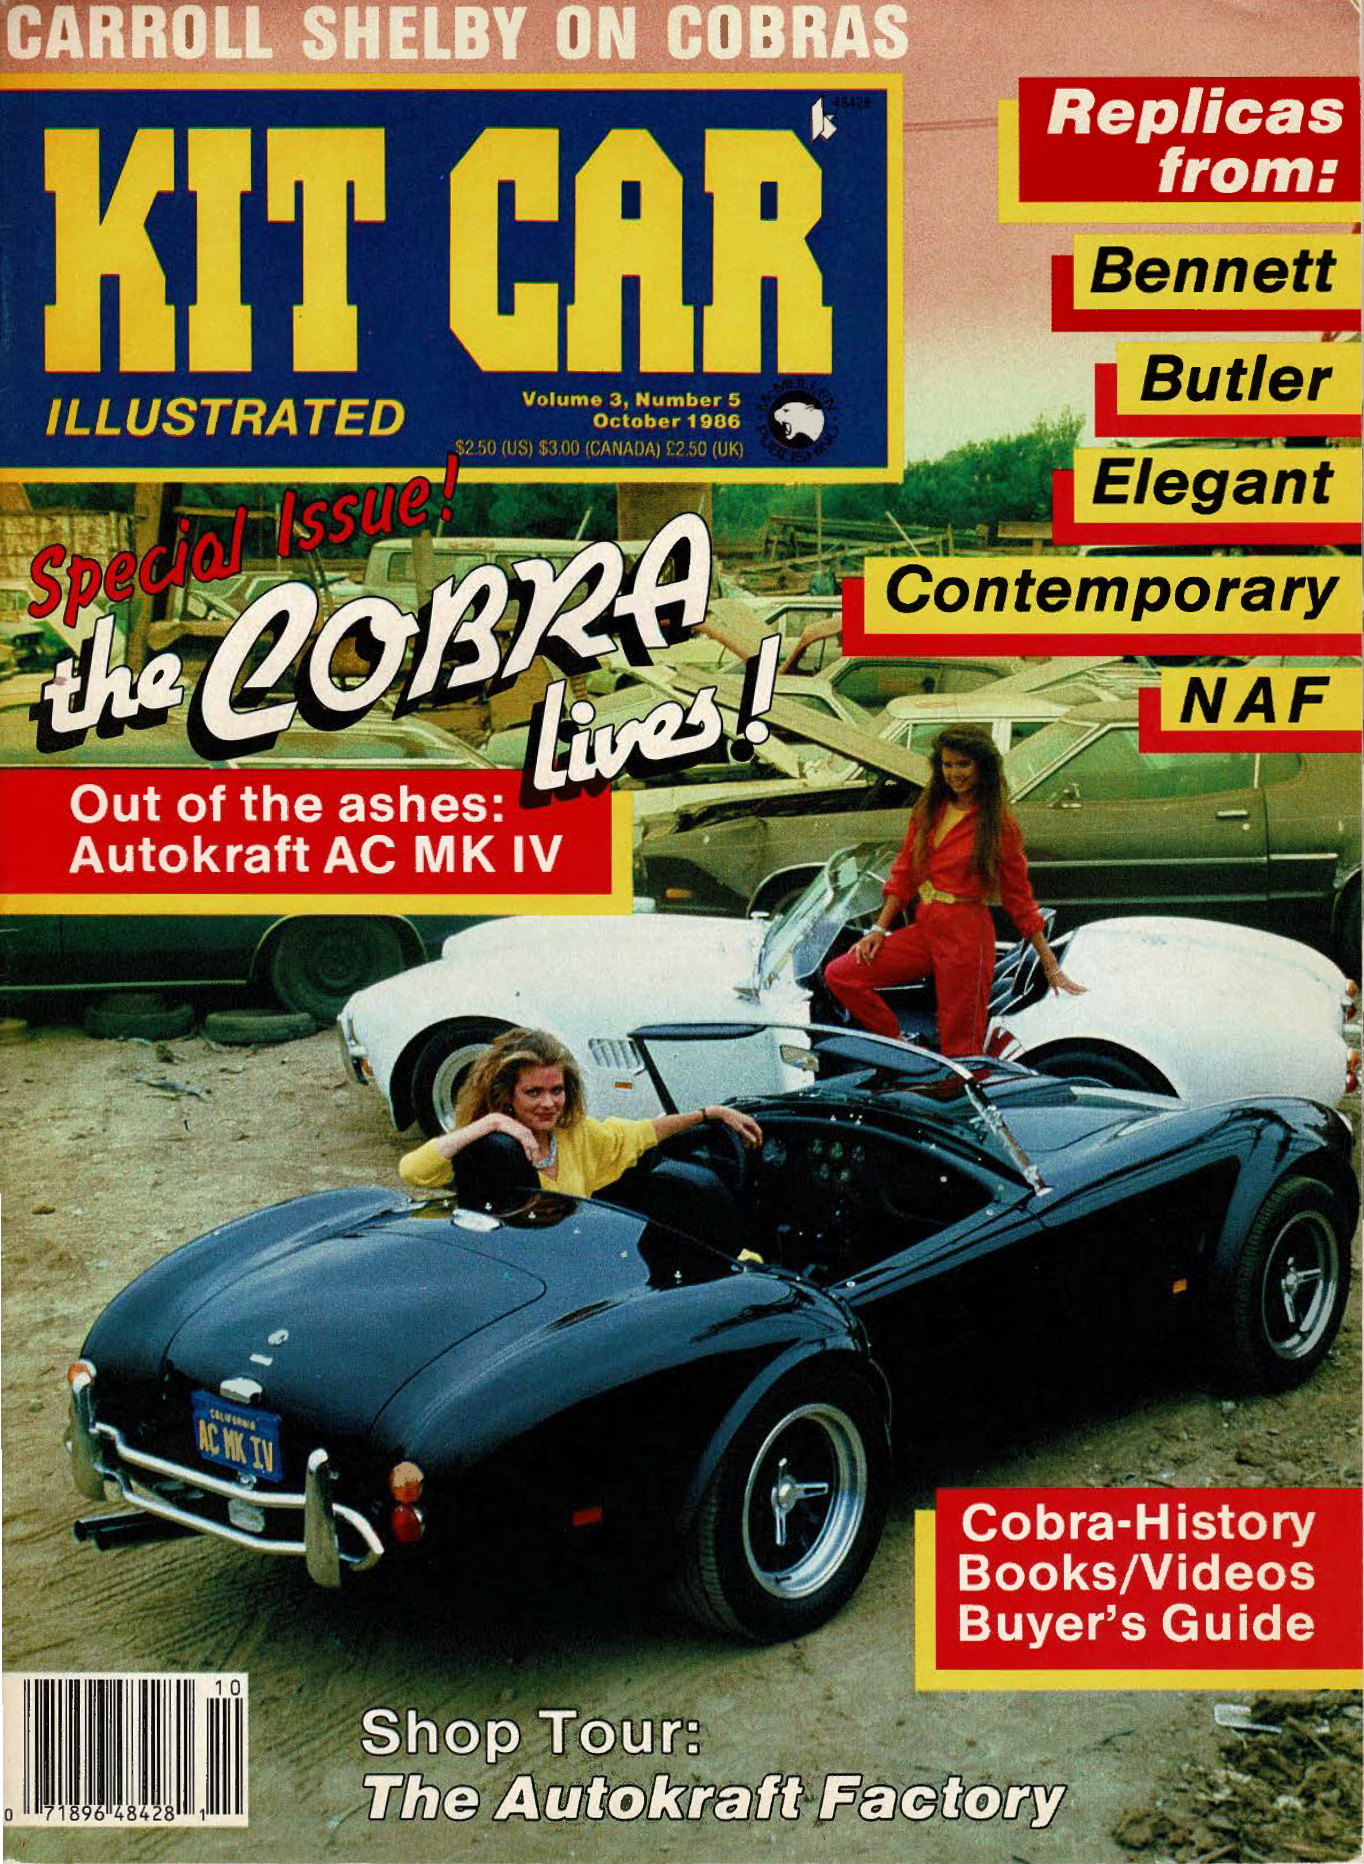 Carroll Shelby vs Brian Angliss and the AC Cobra Mk IV